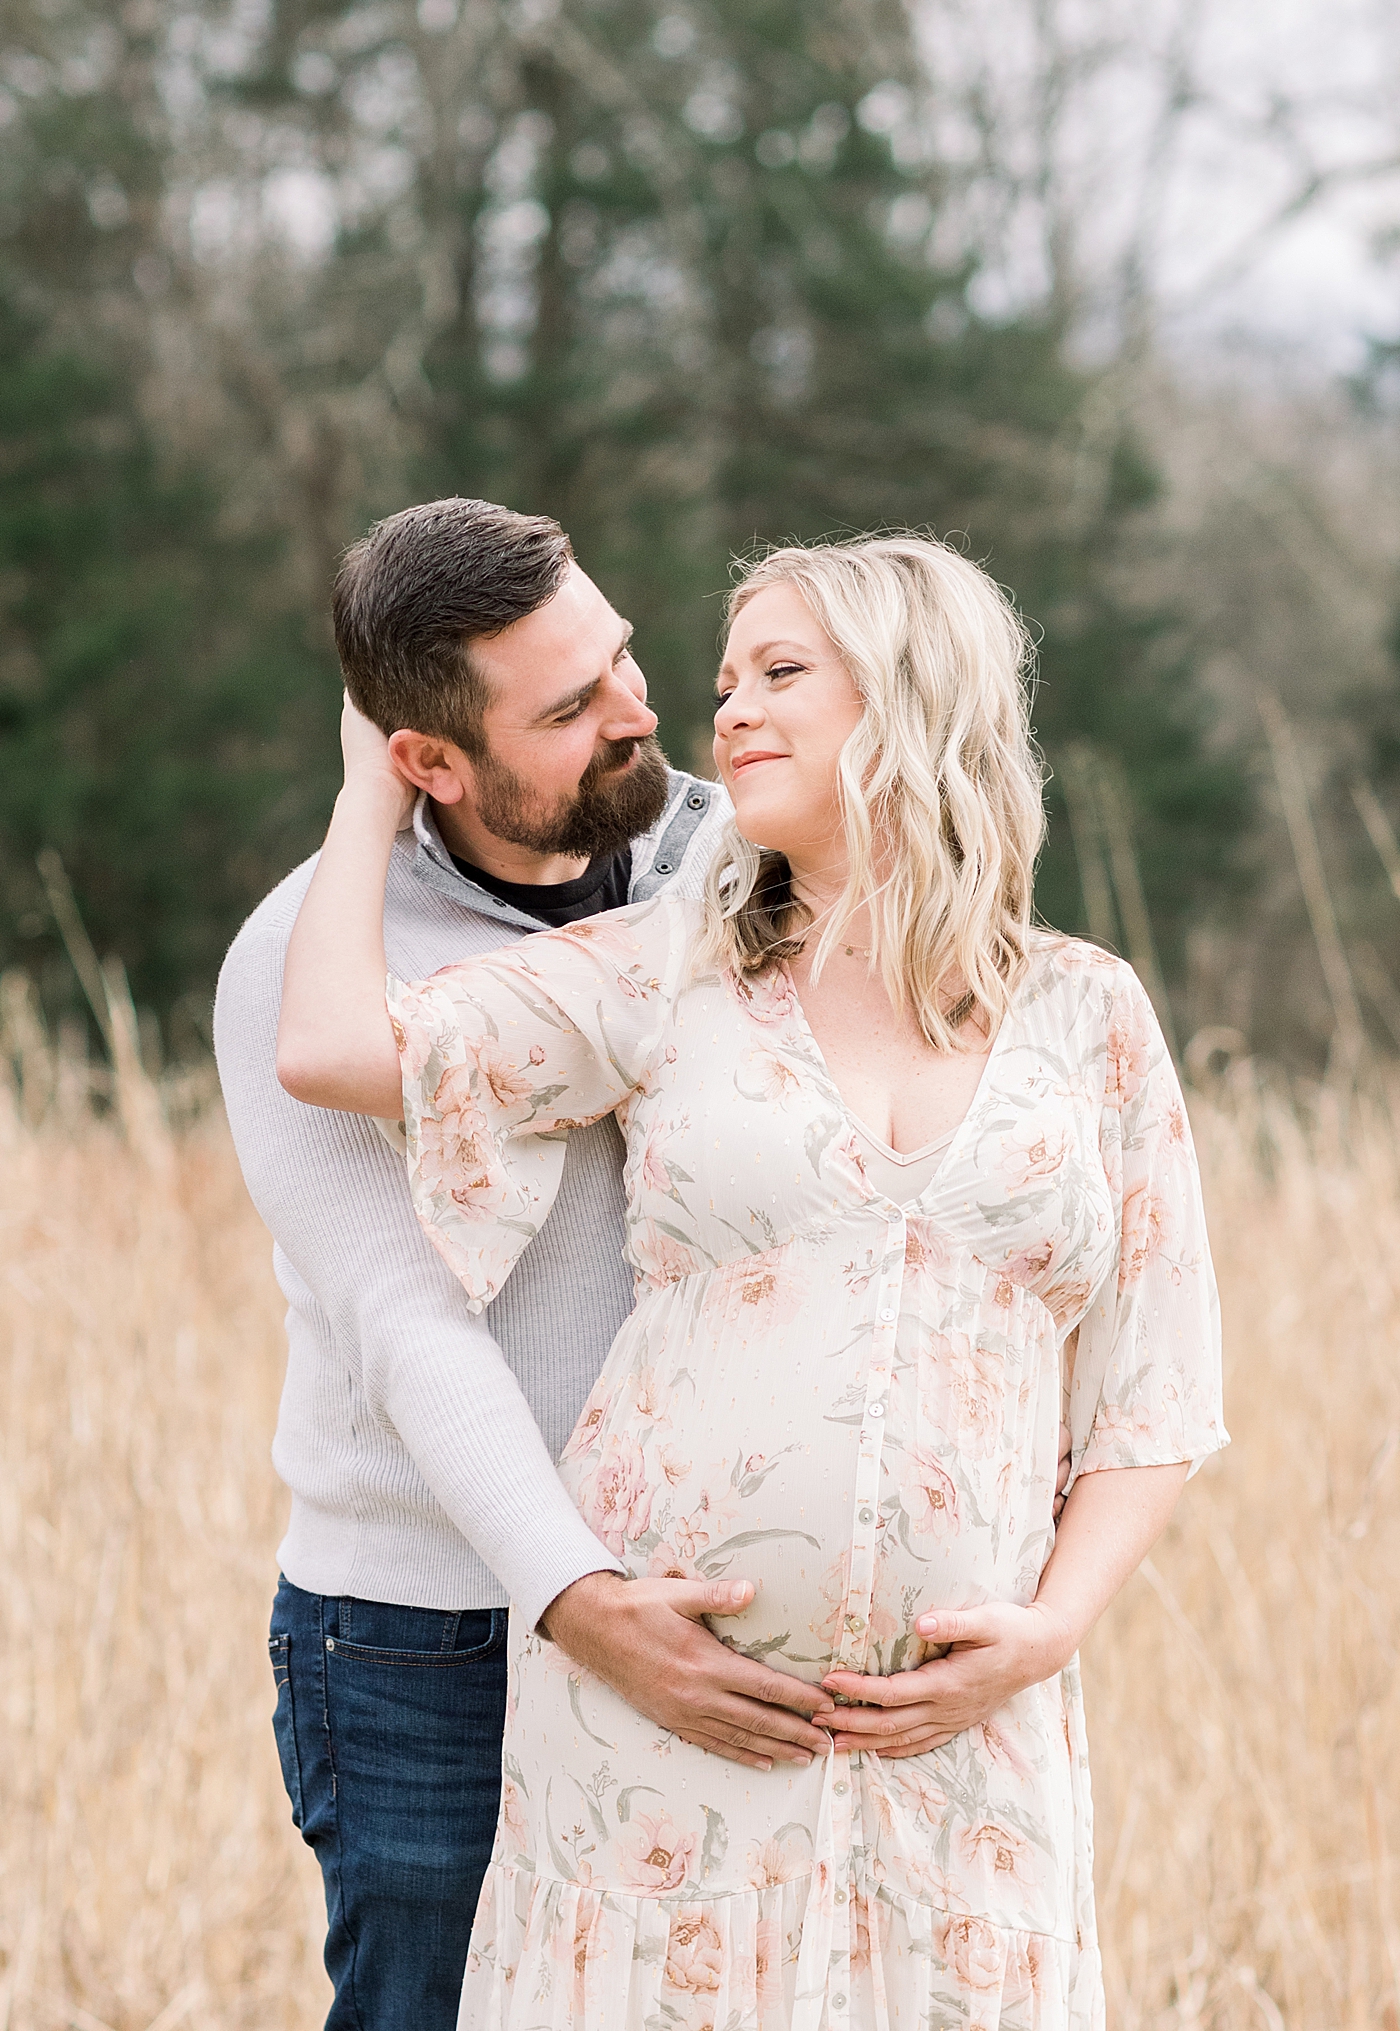 Mom and dad to be in a field | Image by Chrissy Winchester